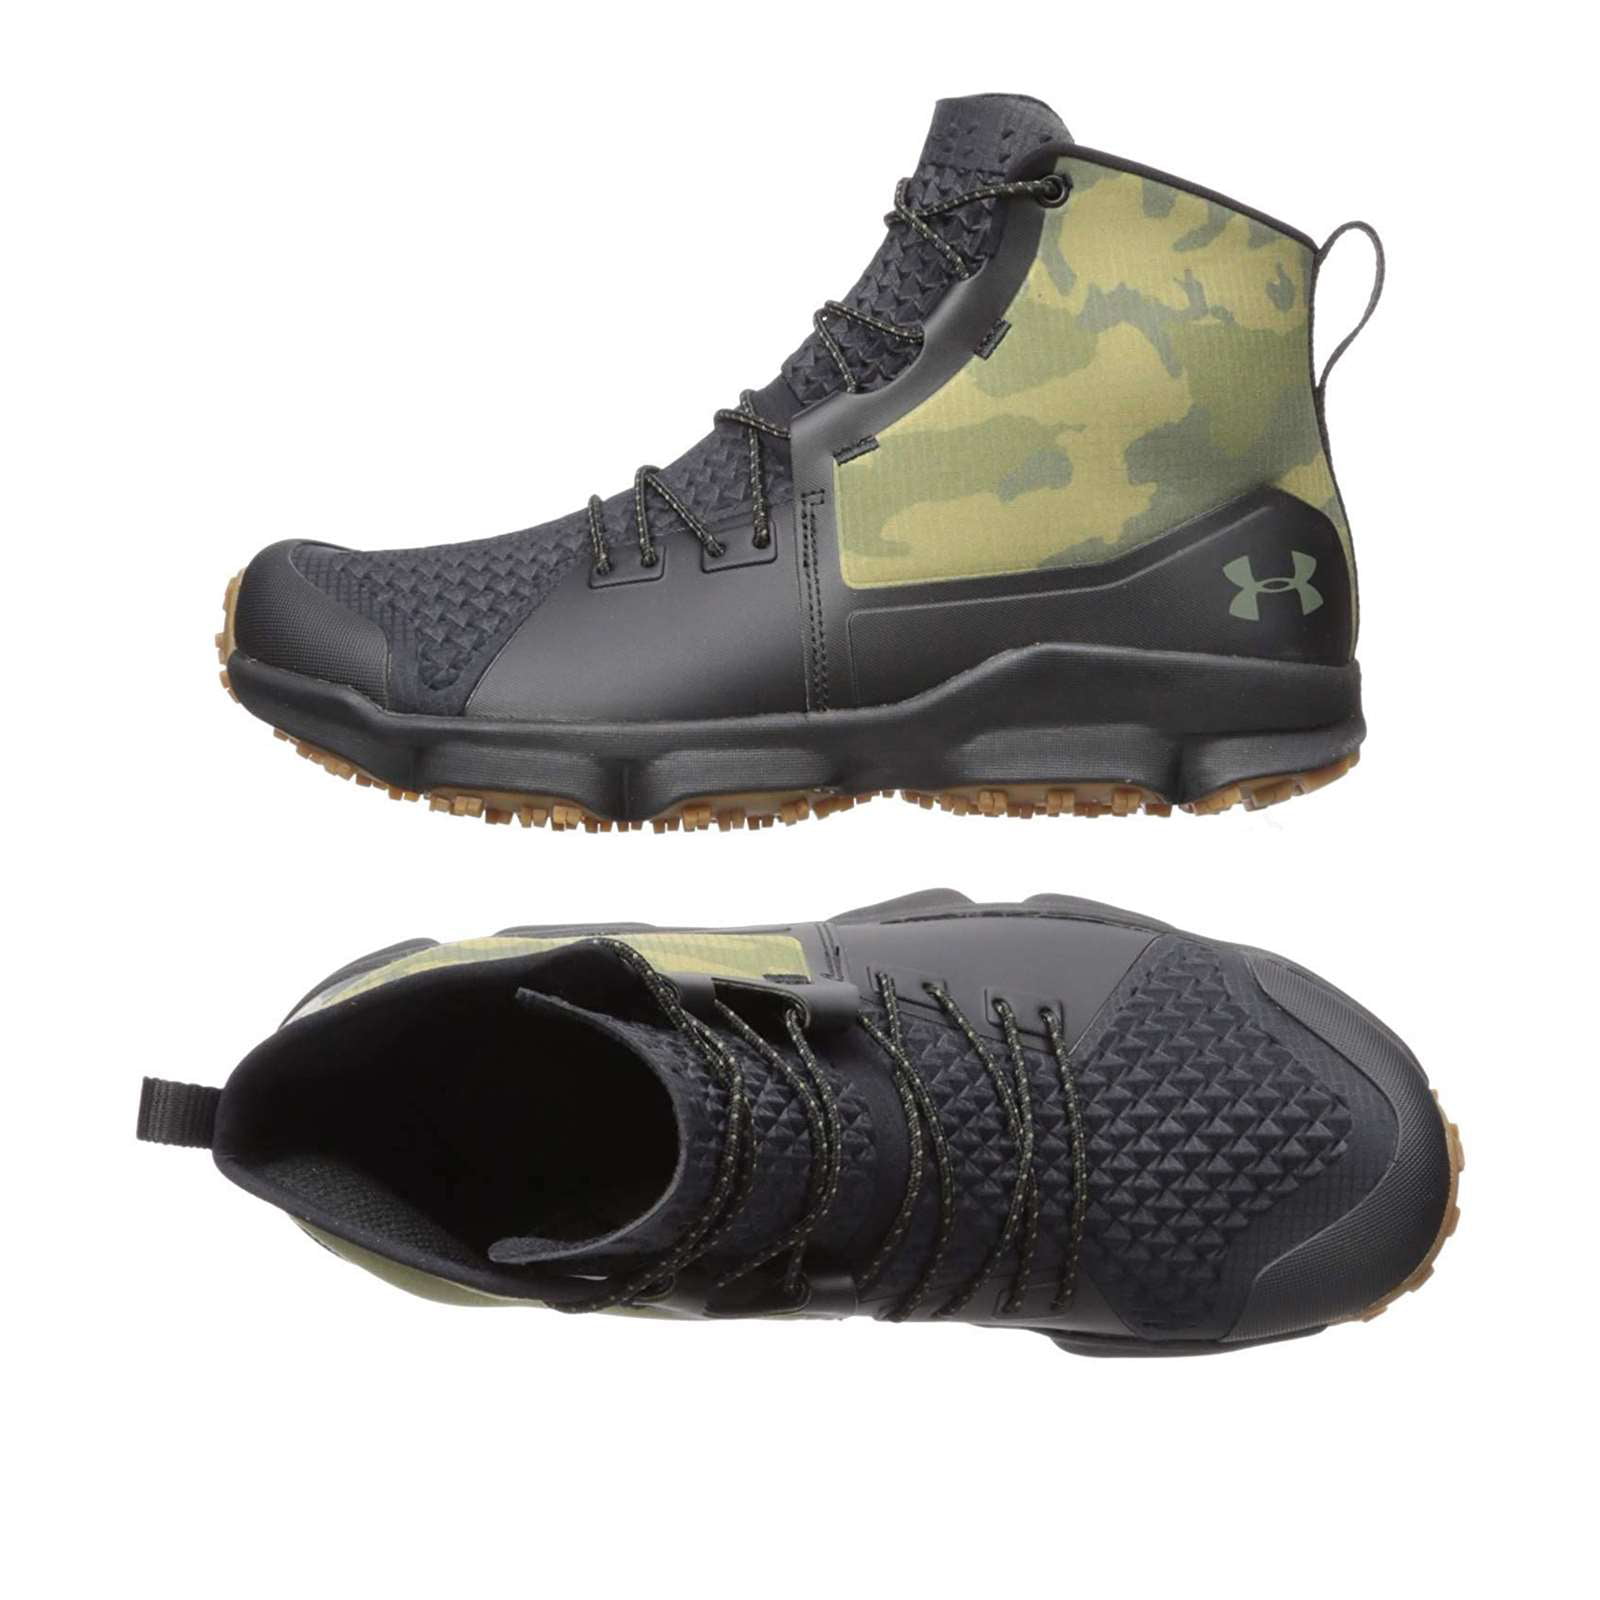 under armour low cut boots